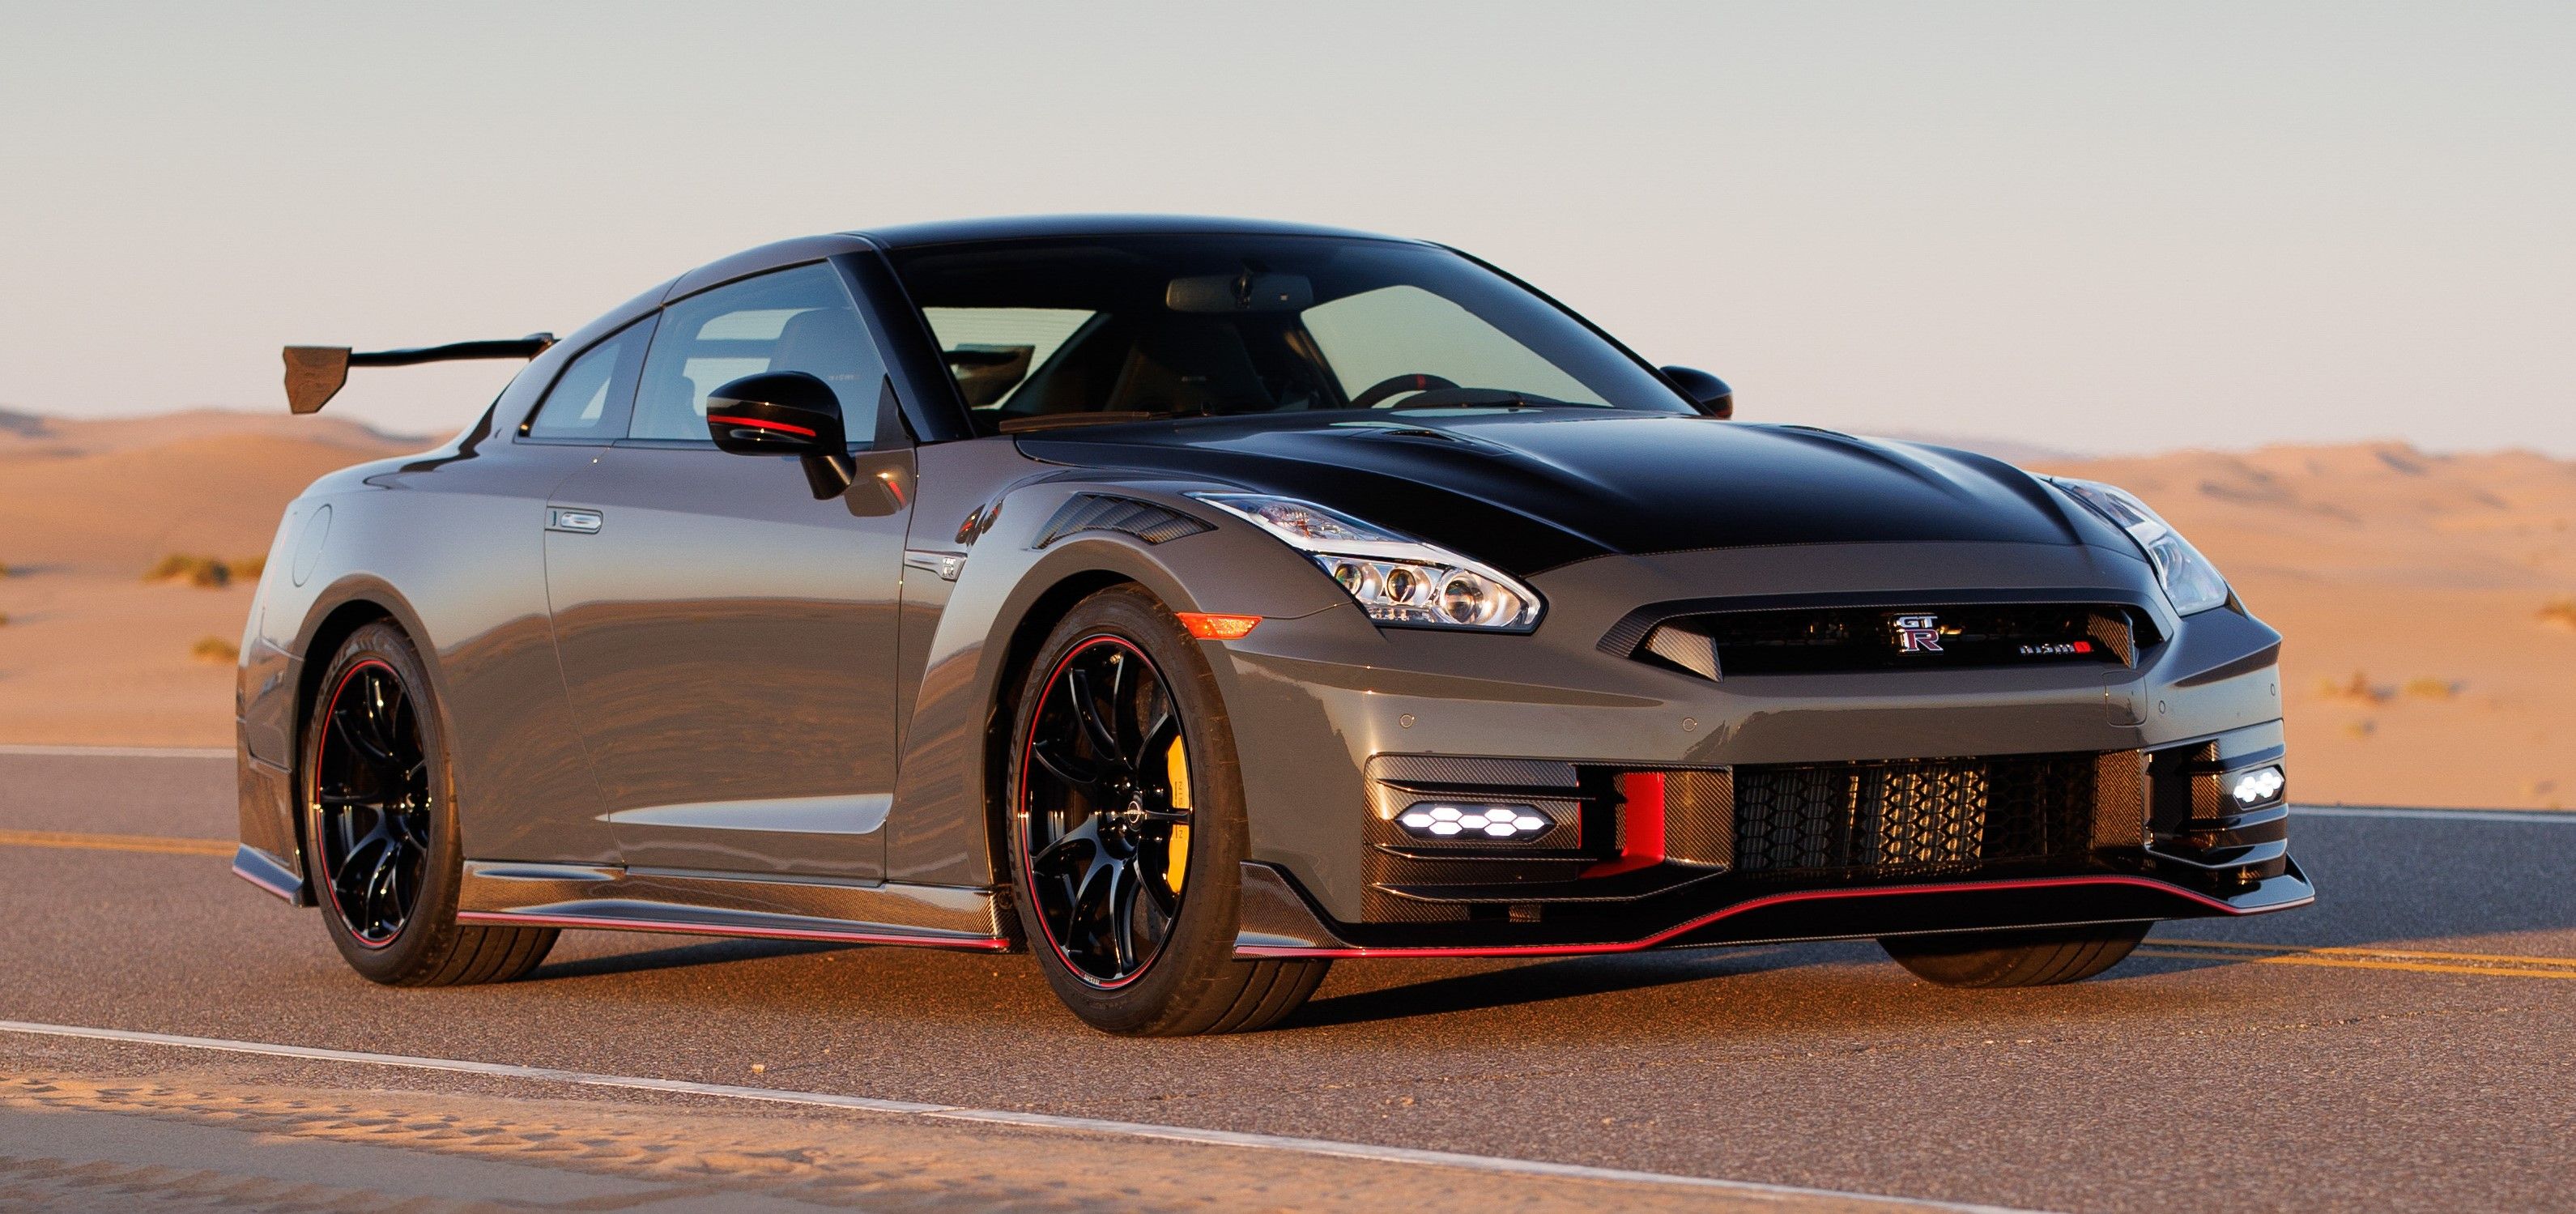 The Pros and Cons of the Nissan GT-R - Autotrader